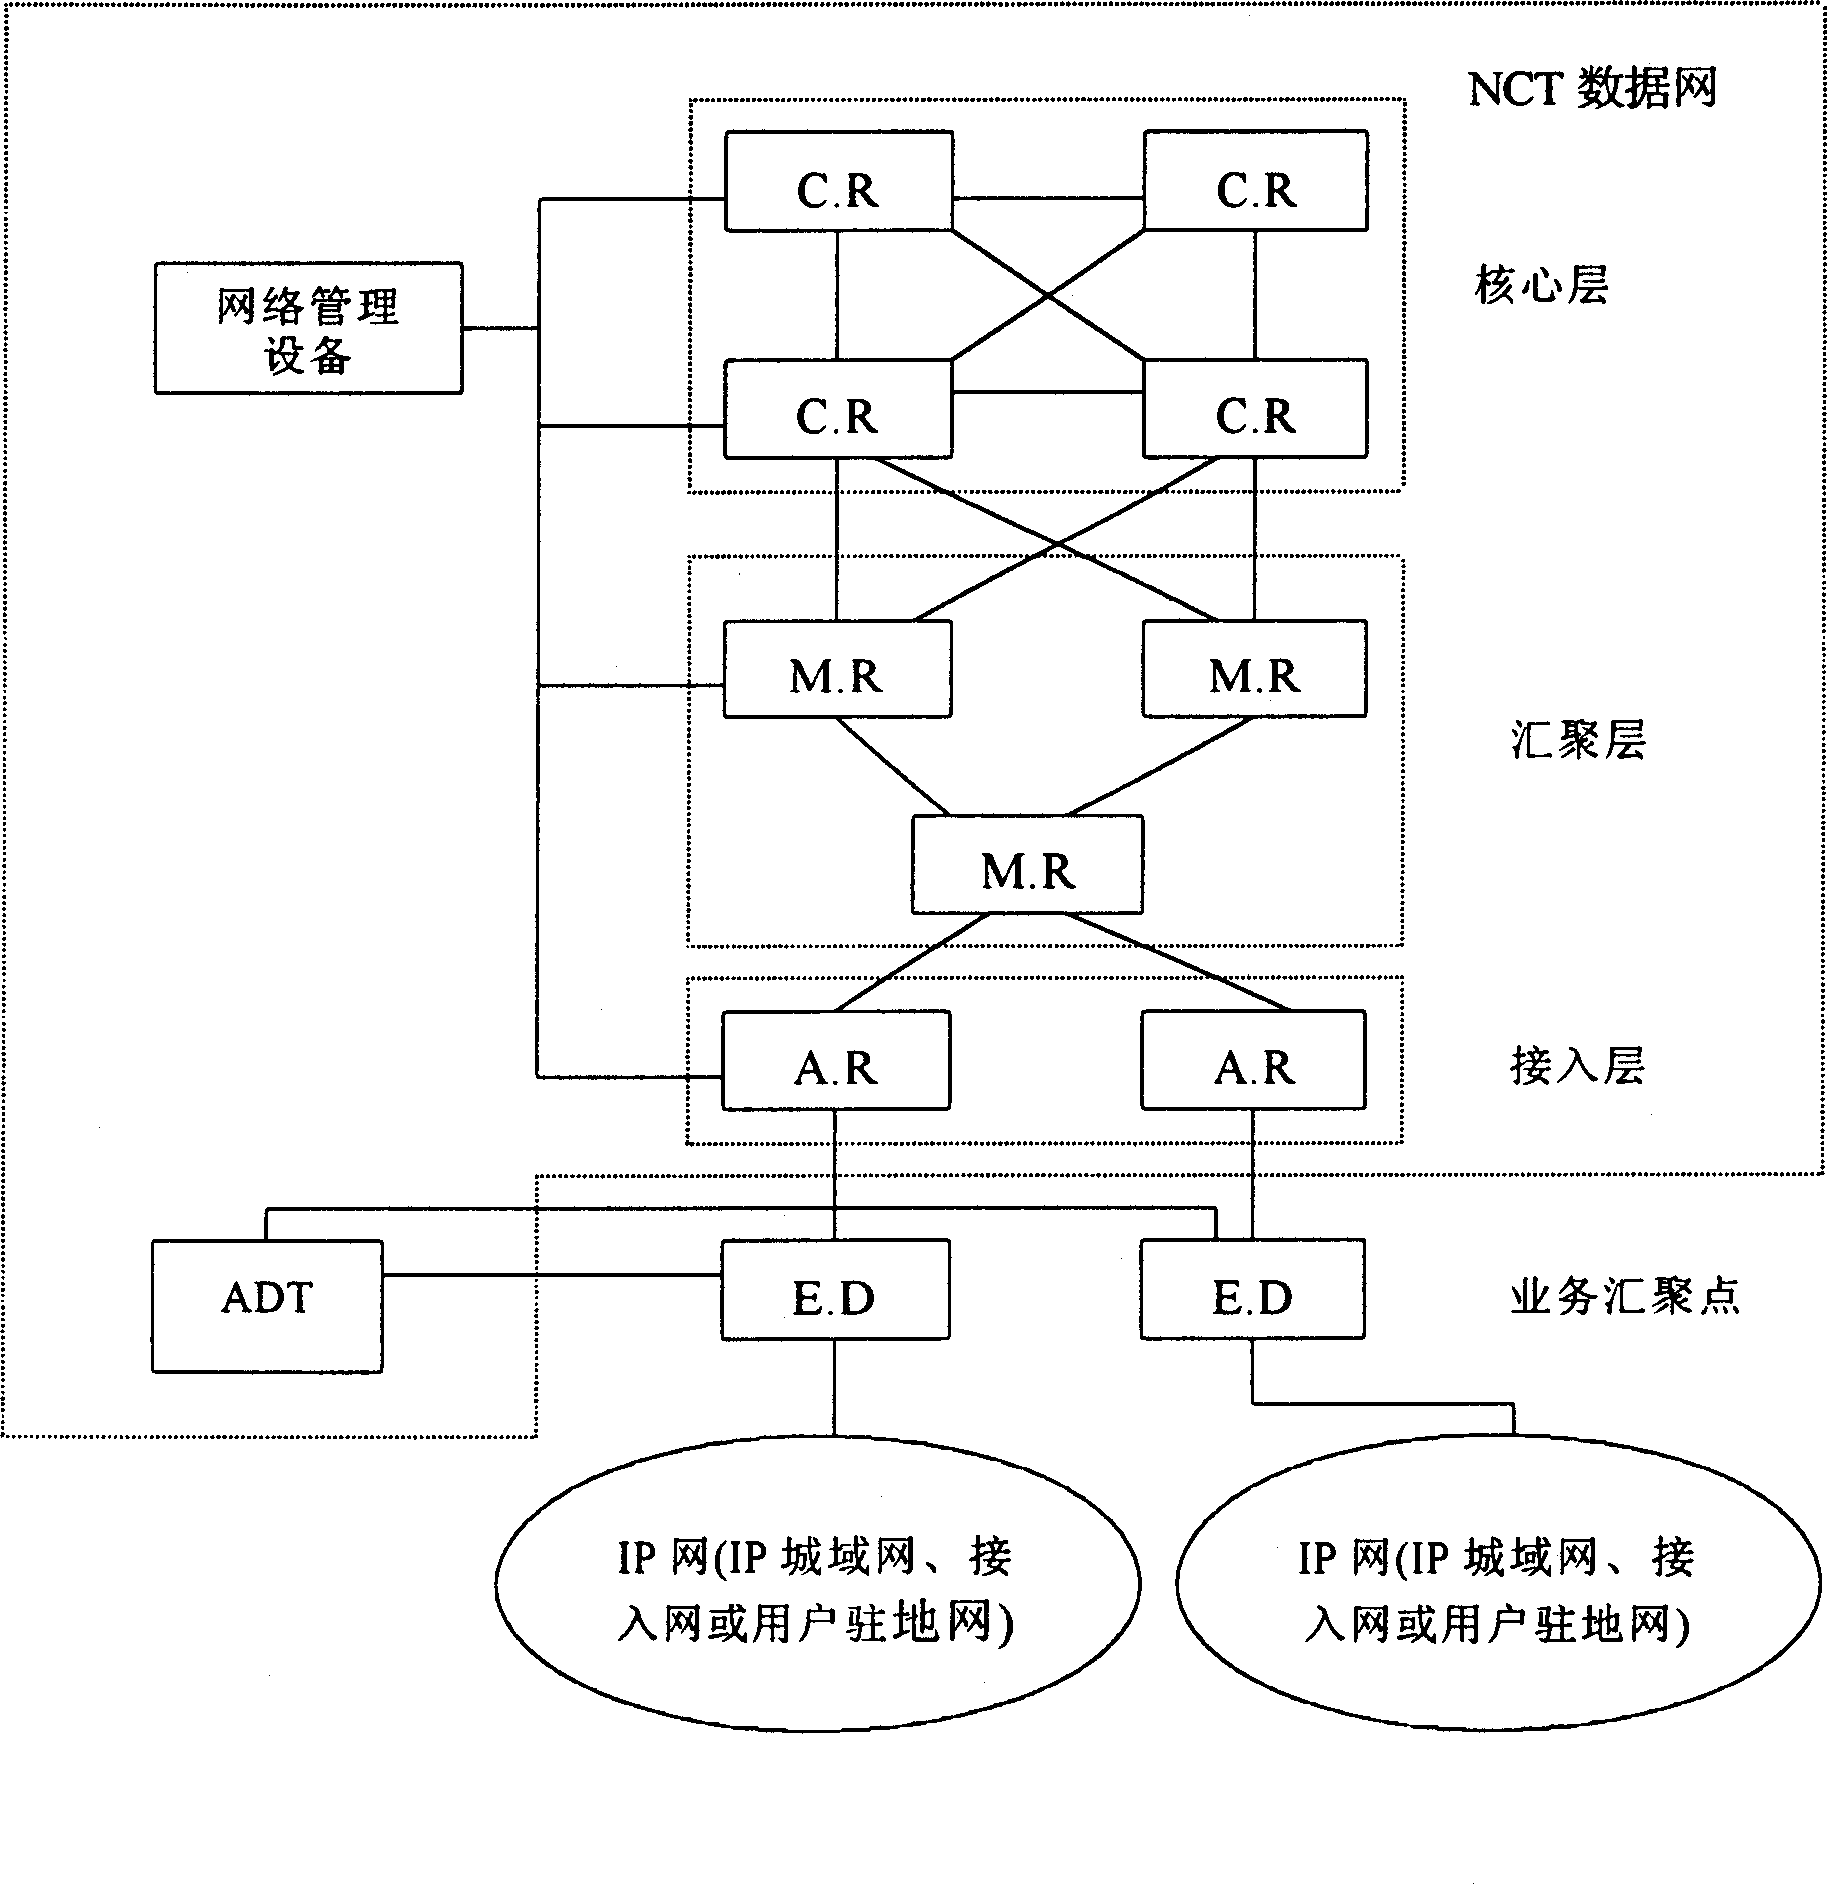 Resource managing method based on signal mechanism in IP telecommunication network system